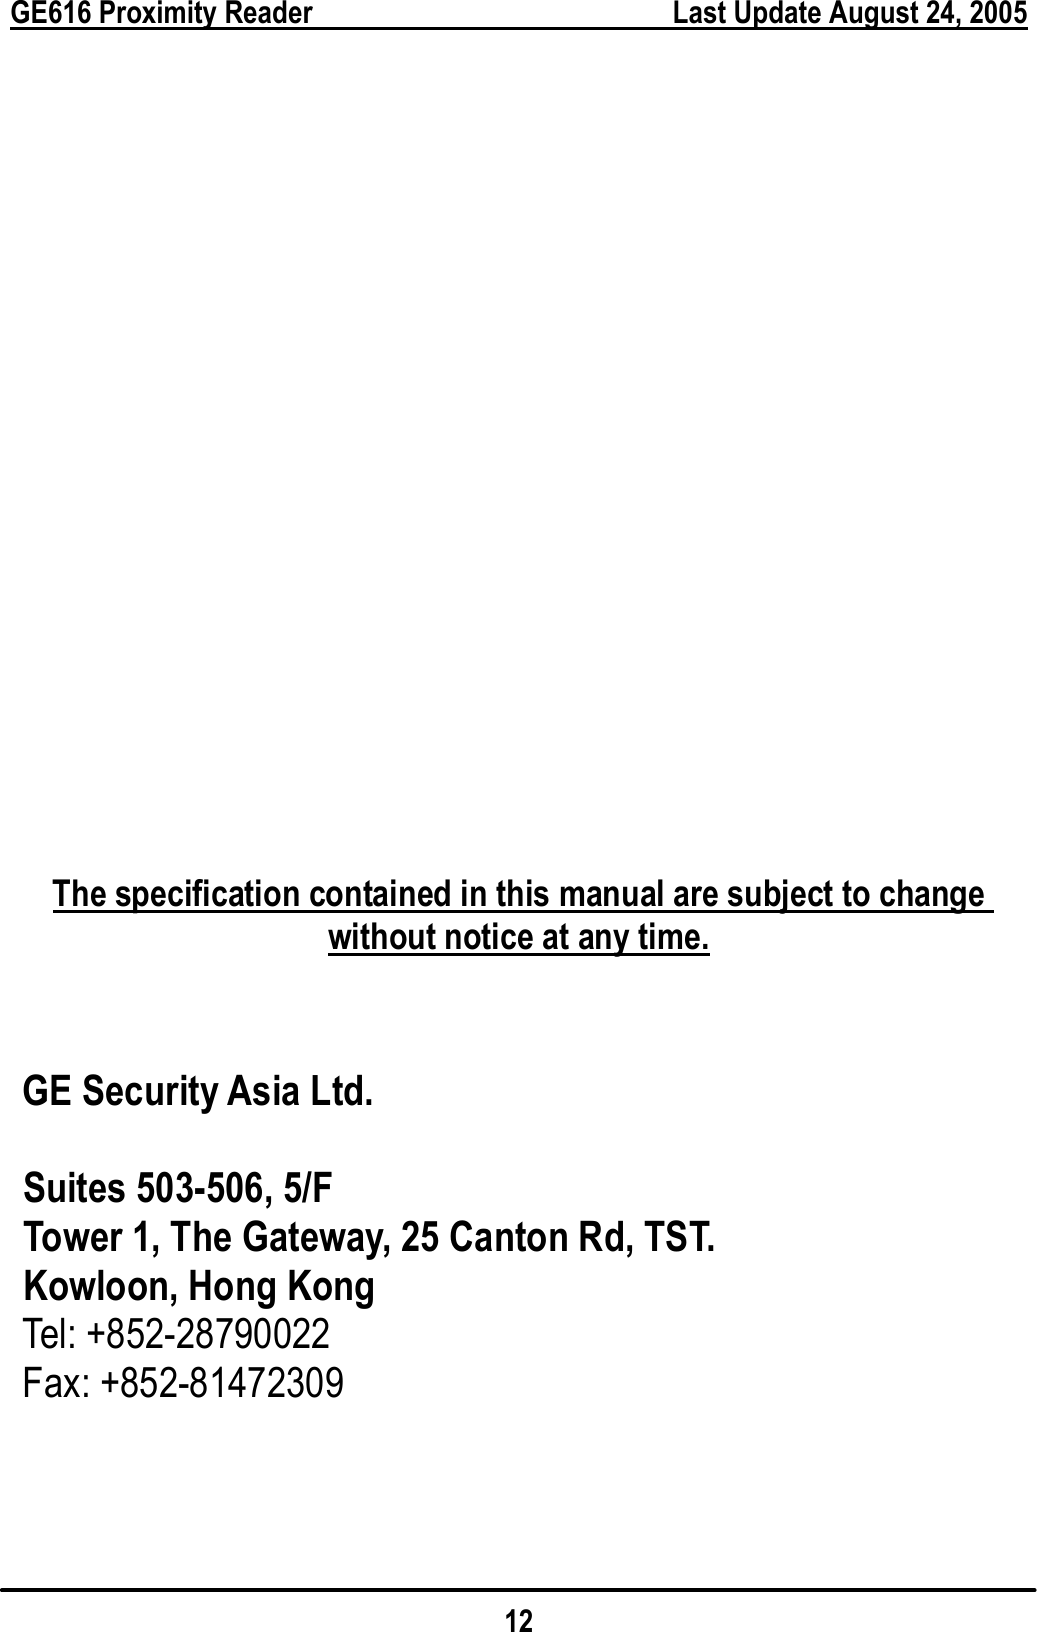  GE616 Proximity Reader        Last Update August 24, 2005 12                    The specification contained in this manual are subject to change without notice at any time.     GE Security Asia Ltd.  Suites 503-506, 5/F   Tower 1, The Gateway, 25 Canton Rd, TST. Kowloon, Hong Kong    Tel: +852-28790022  Fax: +852-81472309    